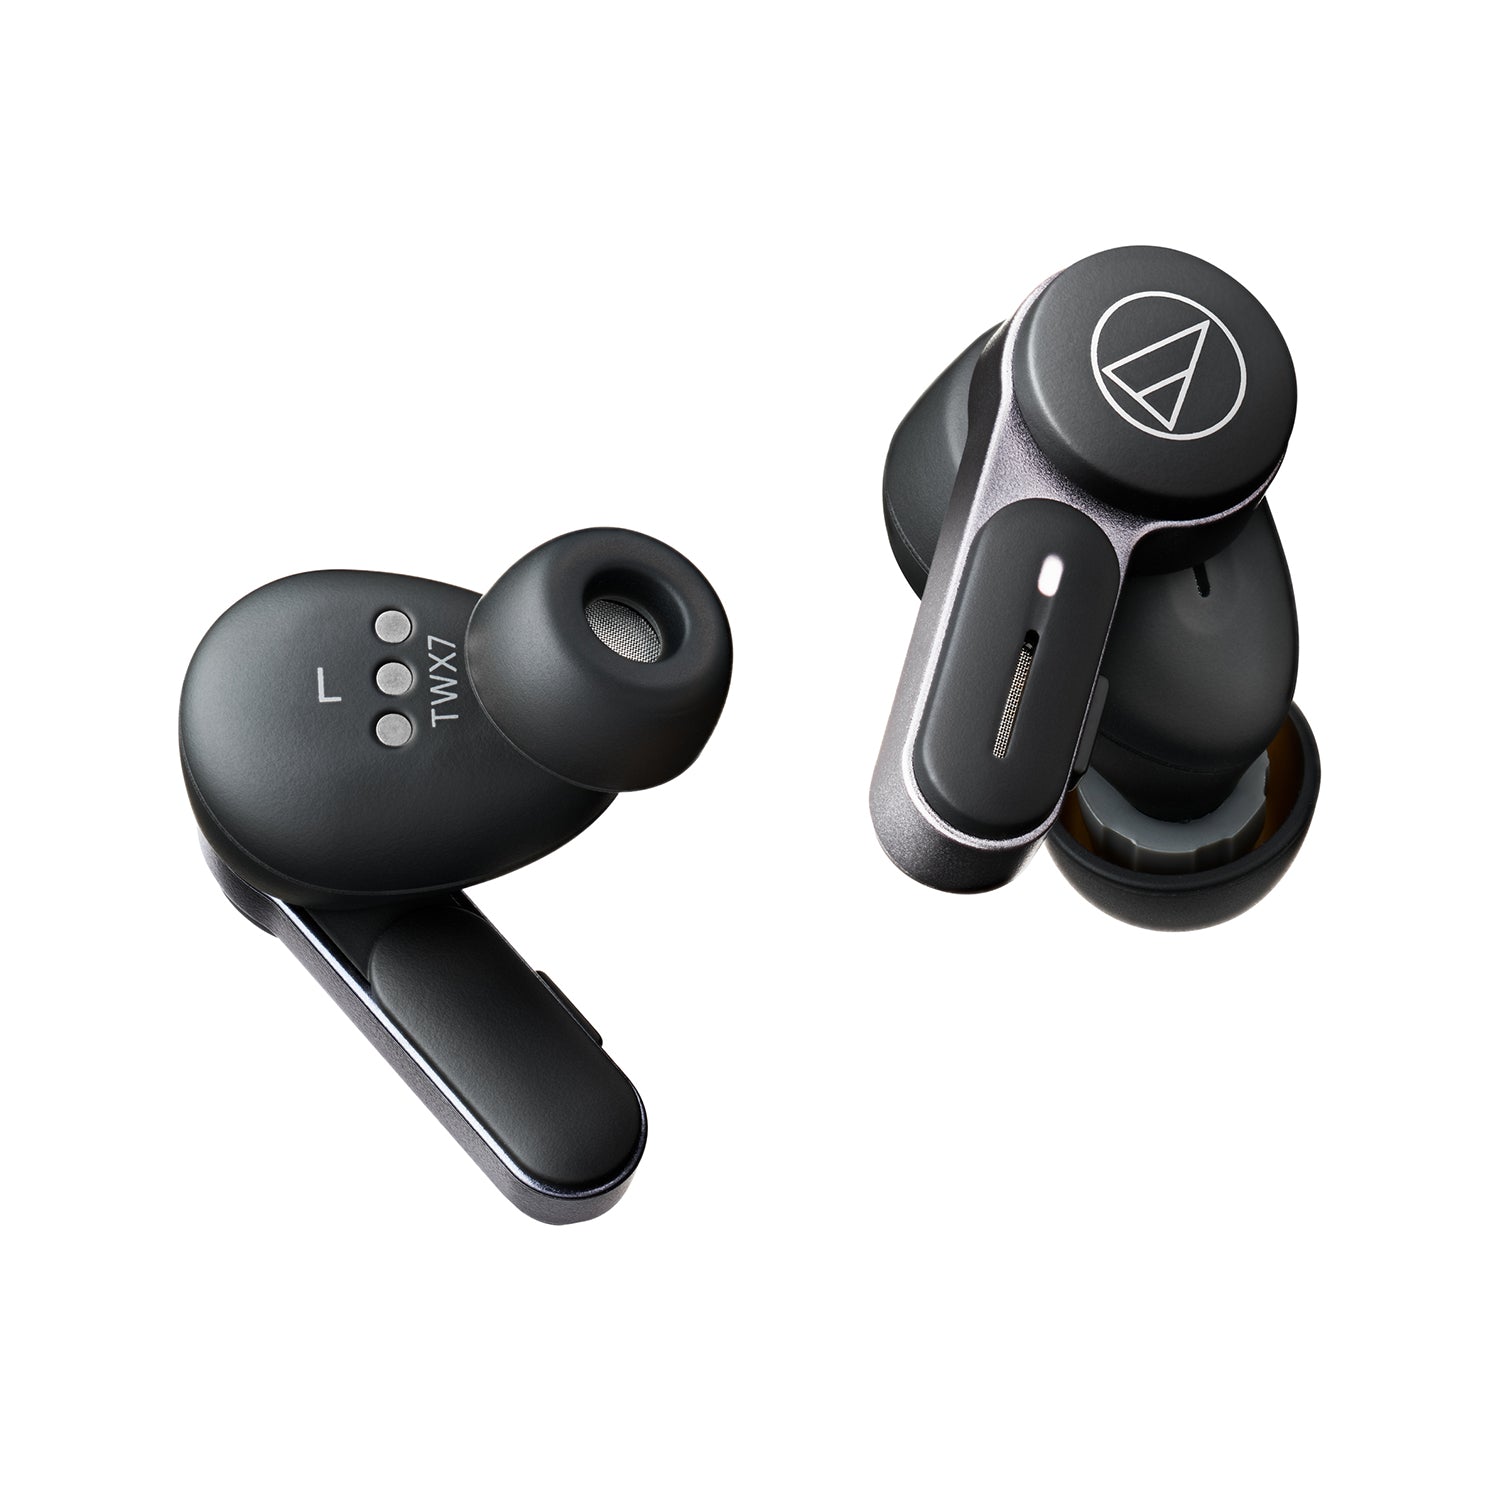 Audio-Technica ATH-TWX7 True Wireless Earbuds with Digital Hybrid Noise Cancelling